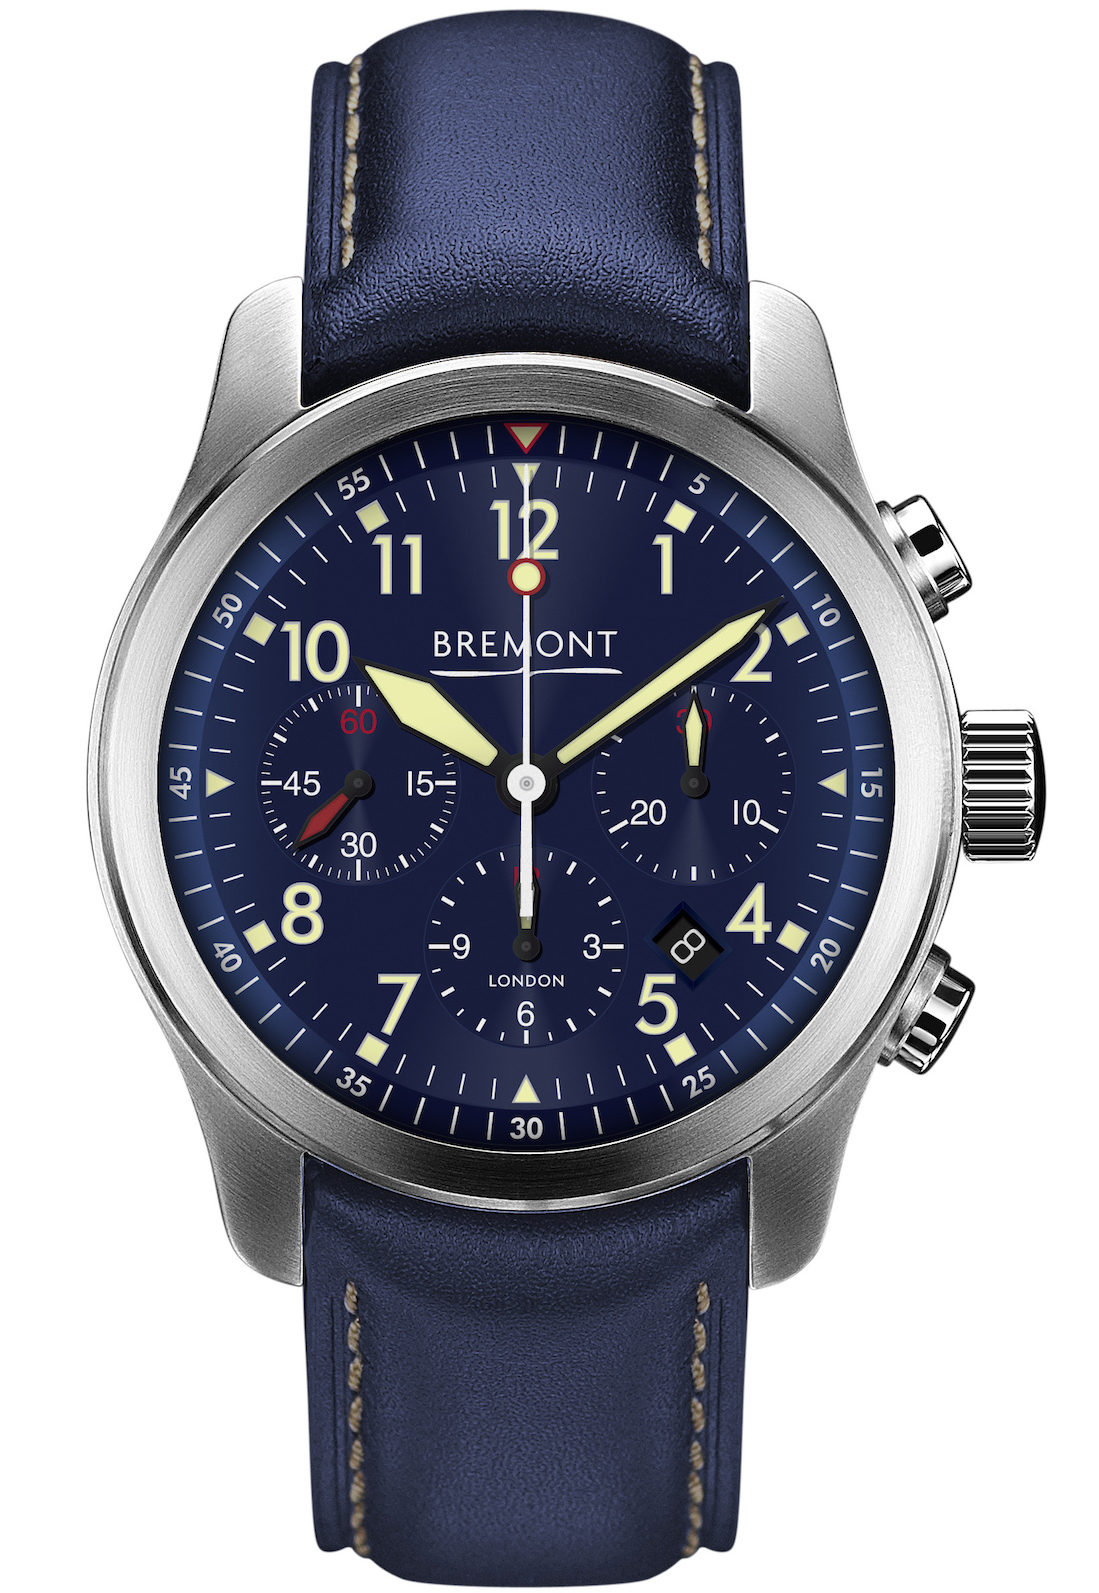 Bremont Watch Lineup For 2017 Announced Watch Releases 